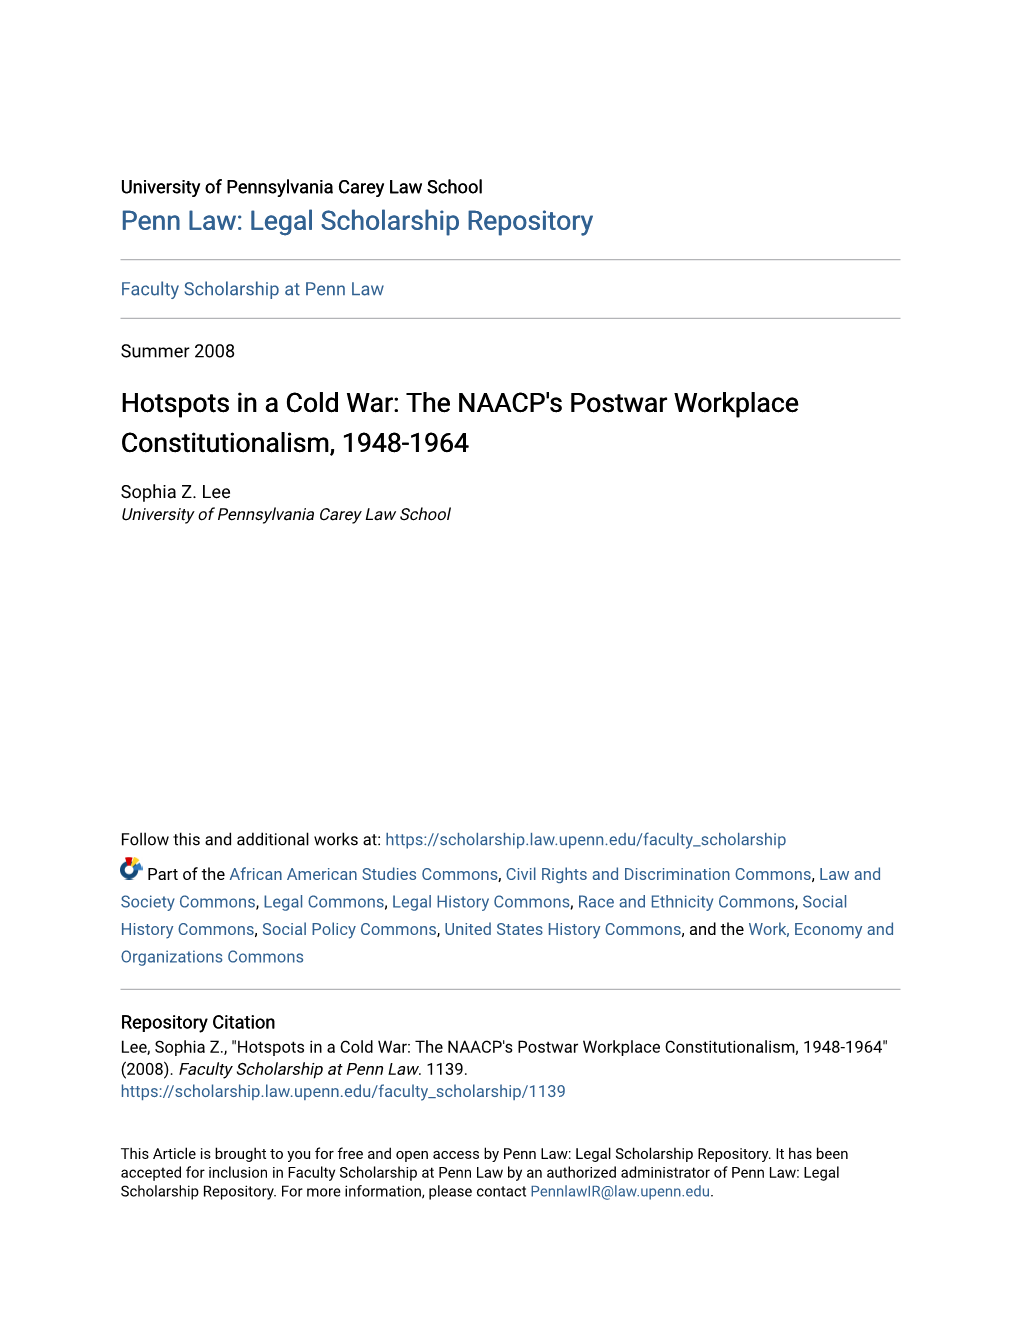 The NAACP's Postwar Workplace Constitutionalism, 1948-1964